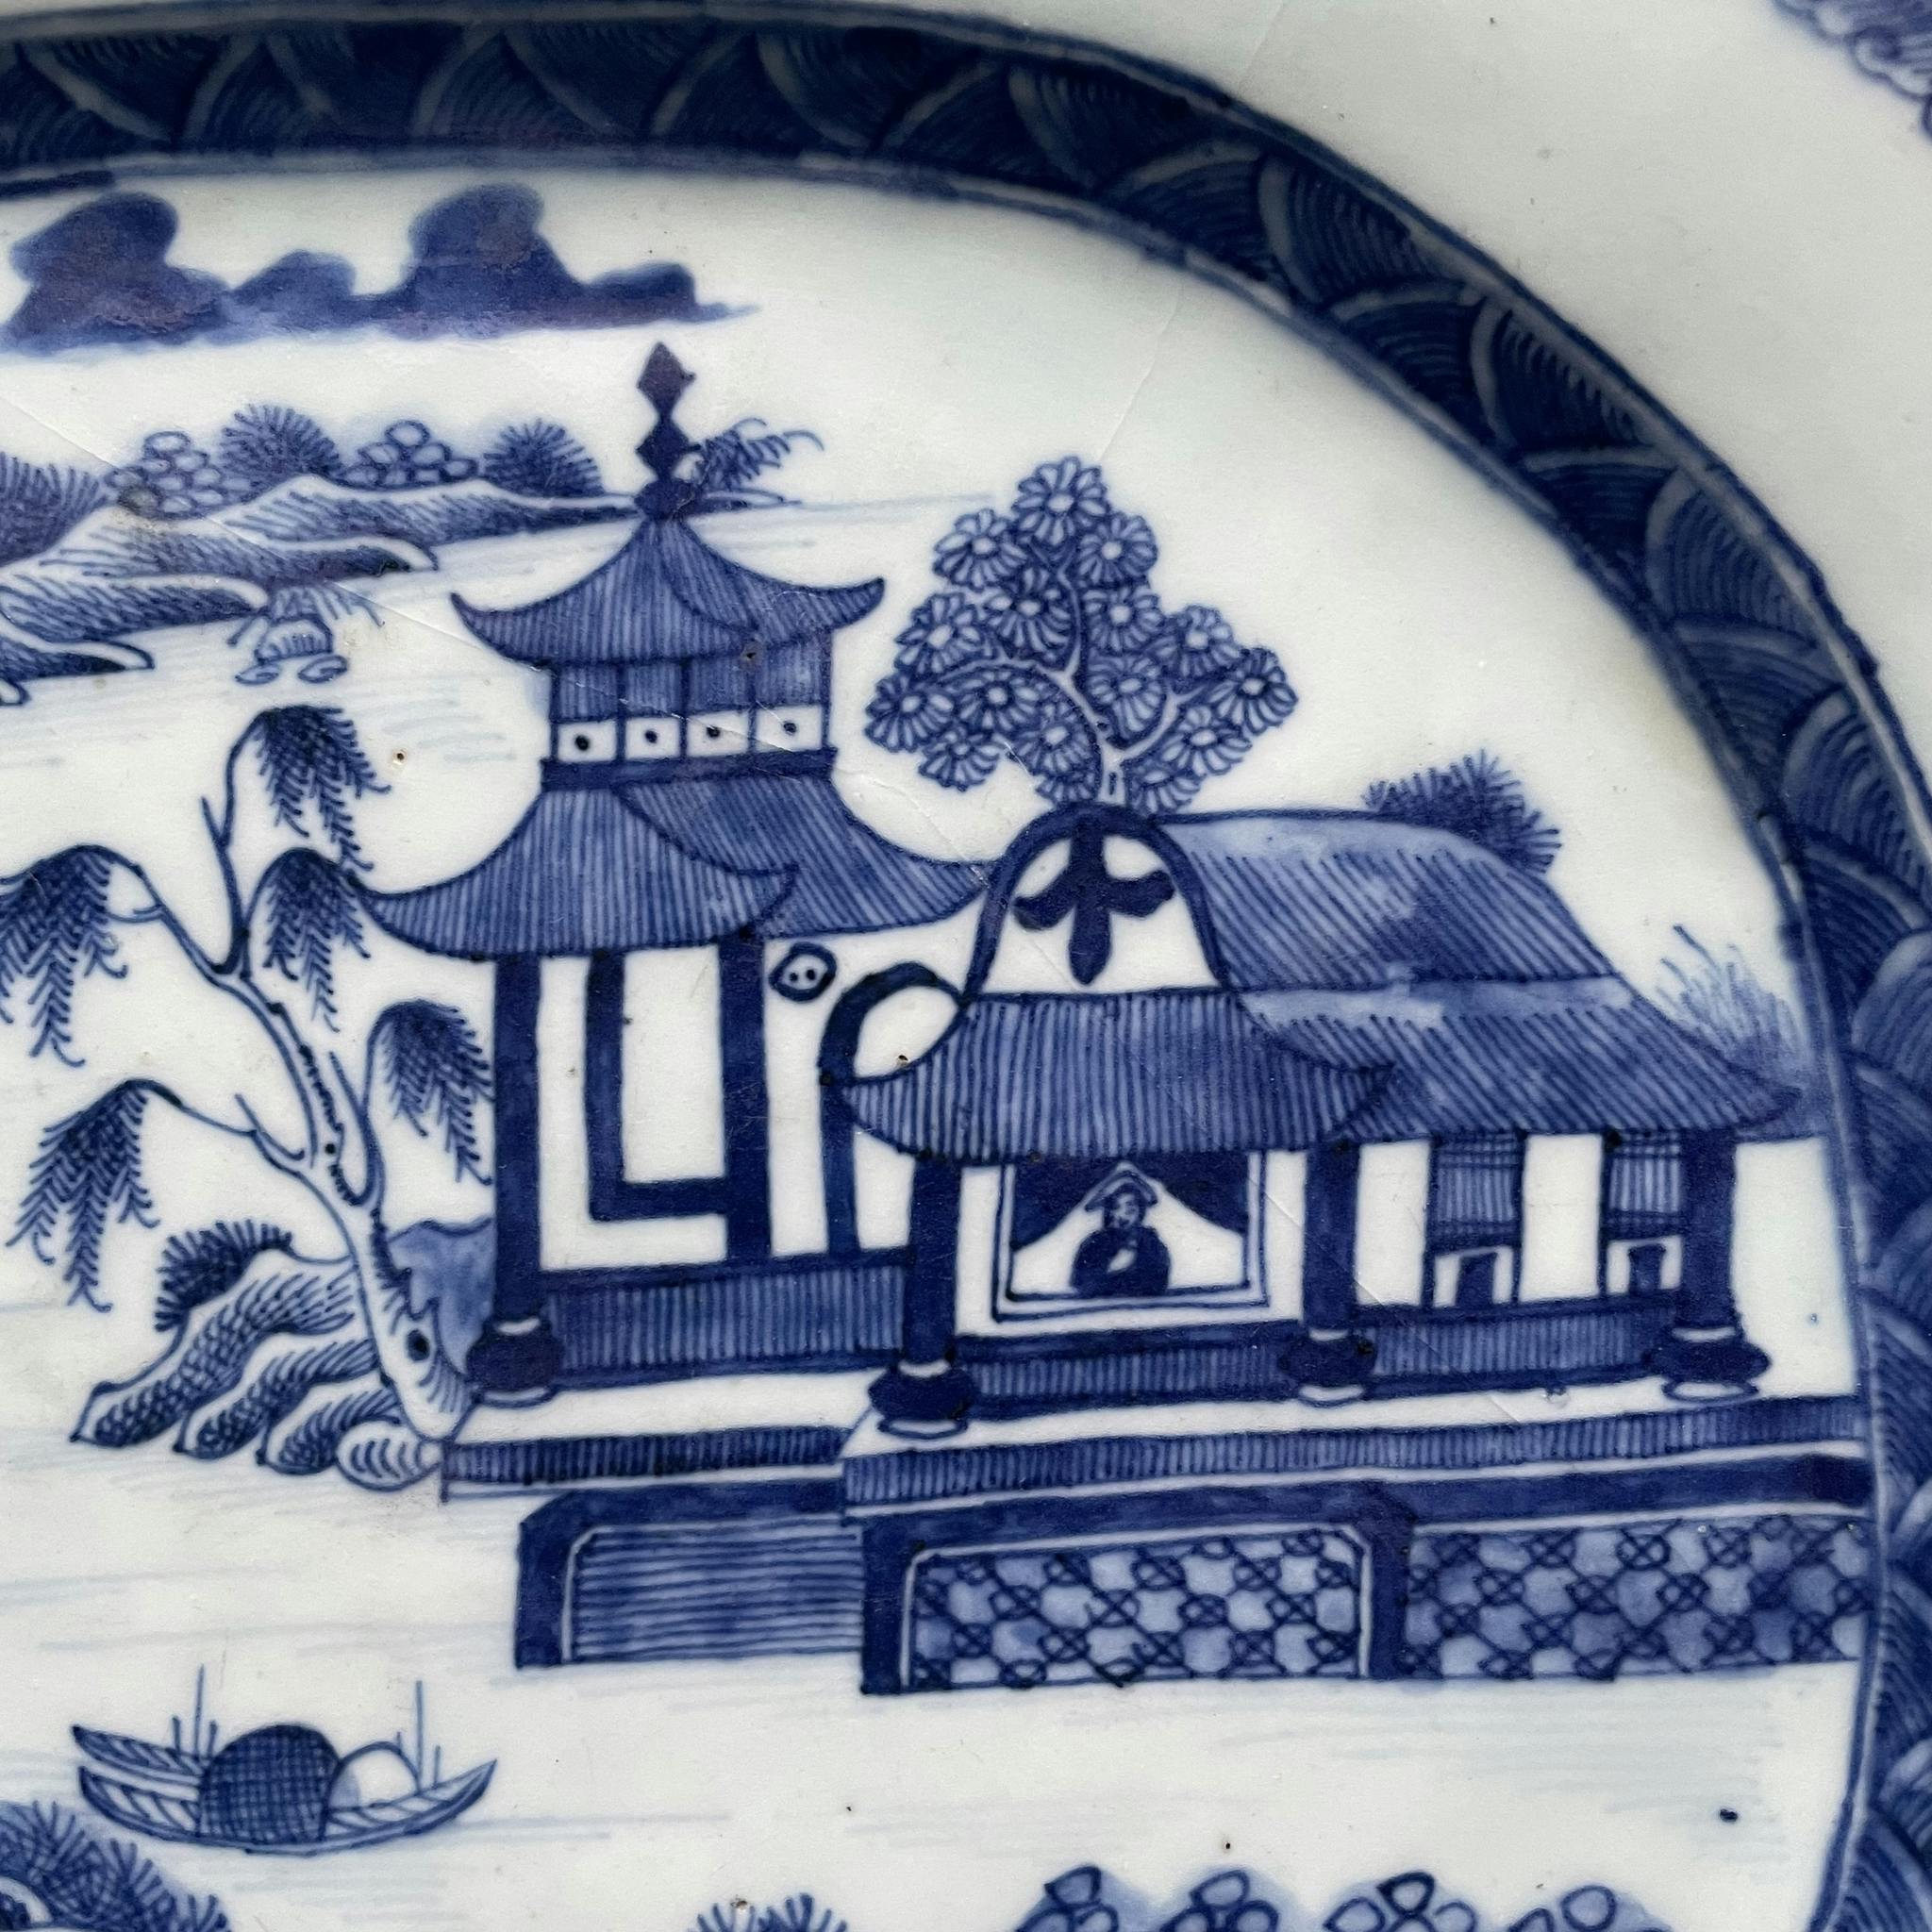 Antique Chinese Export Blue and White Porcelain platter, 18th / 19th c #1315